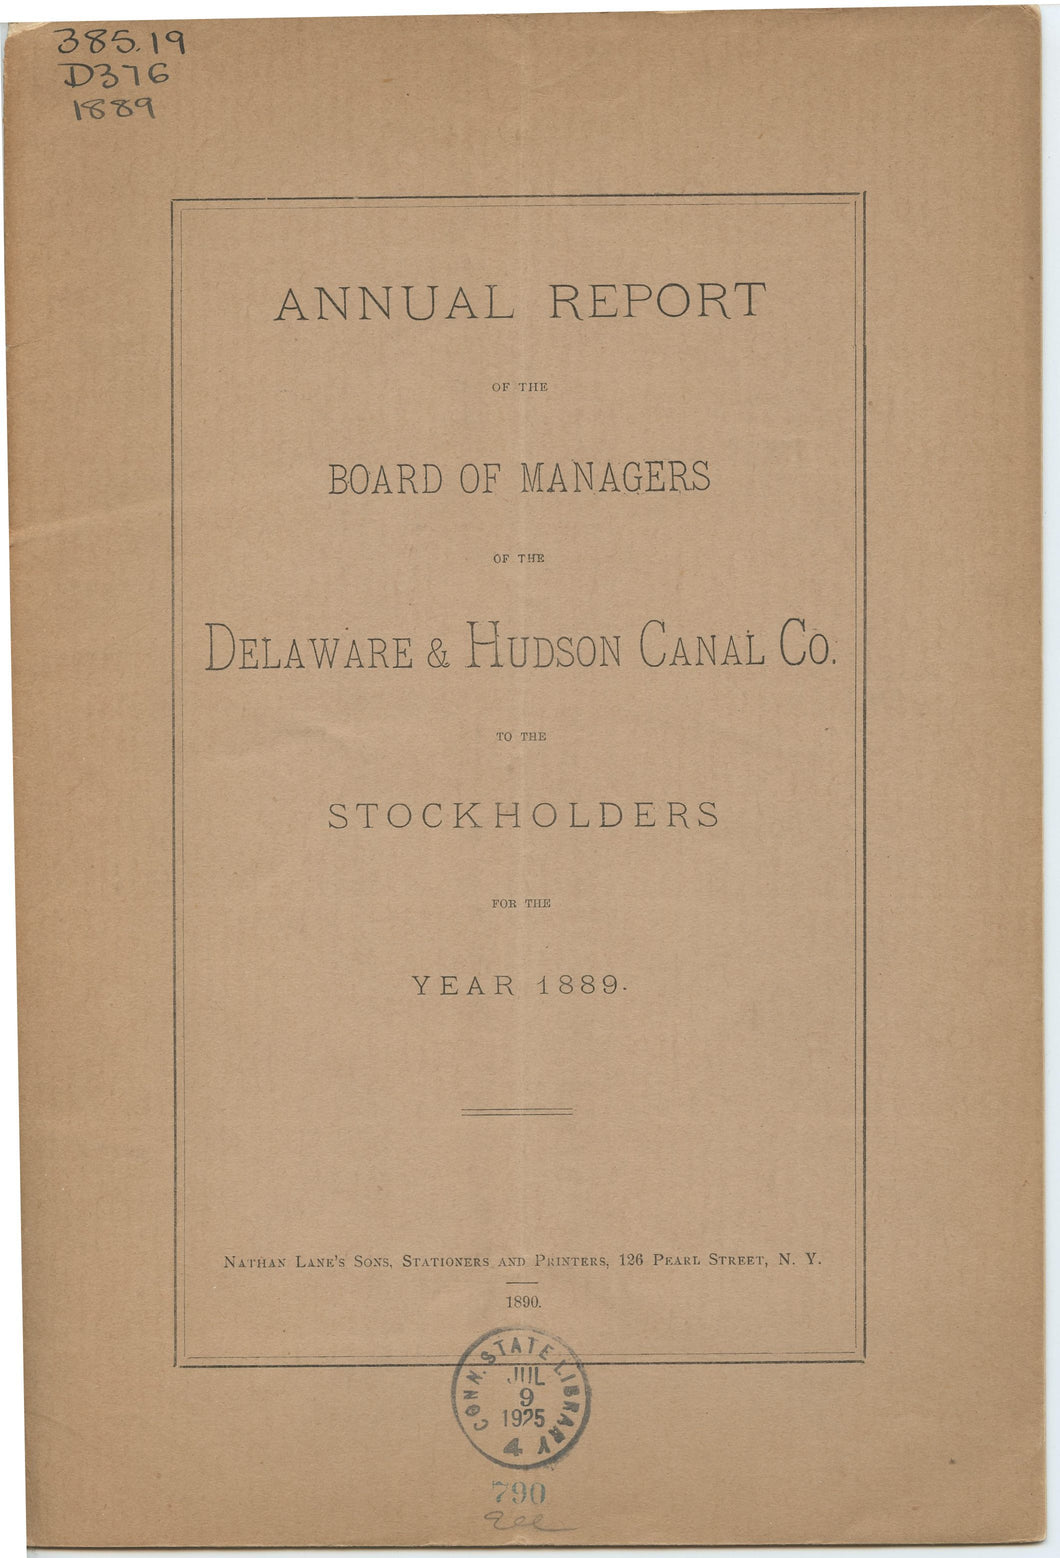 Annual Report of the Board of Managers of the Delaware & Hudson Canal Co. to the Stockholders, for the Year 1889